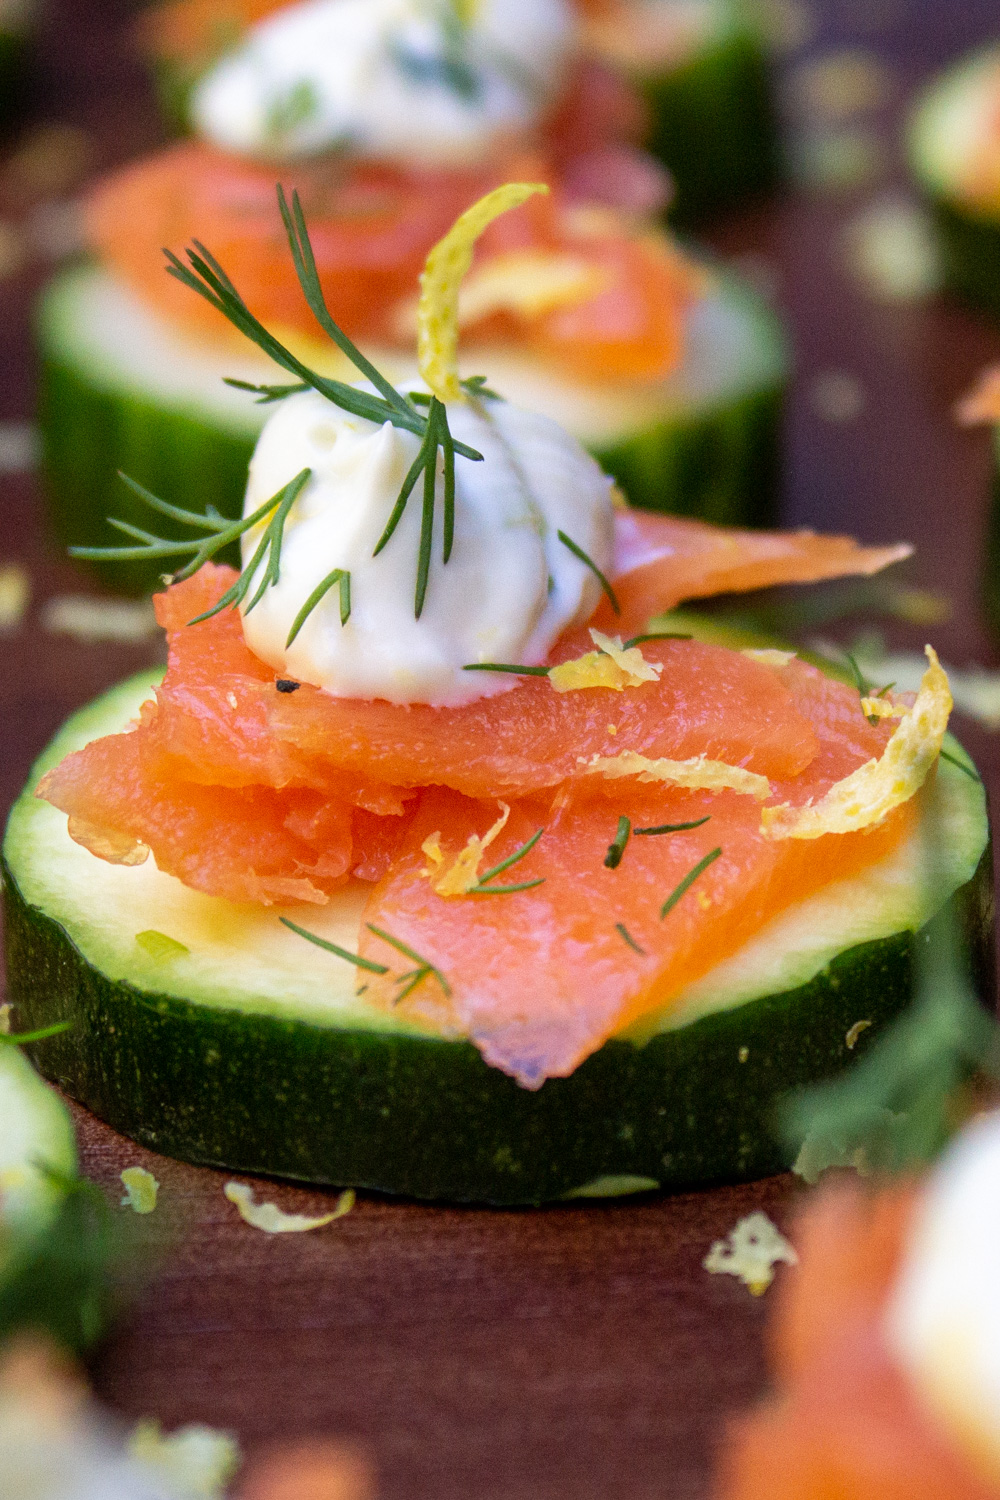 smoked salmon canapes on cucumber garnished with dill and lemon zest.